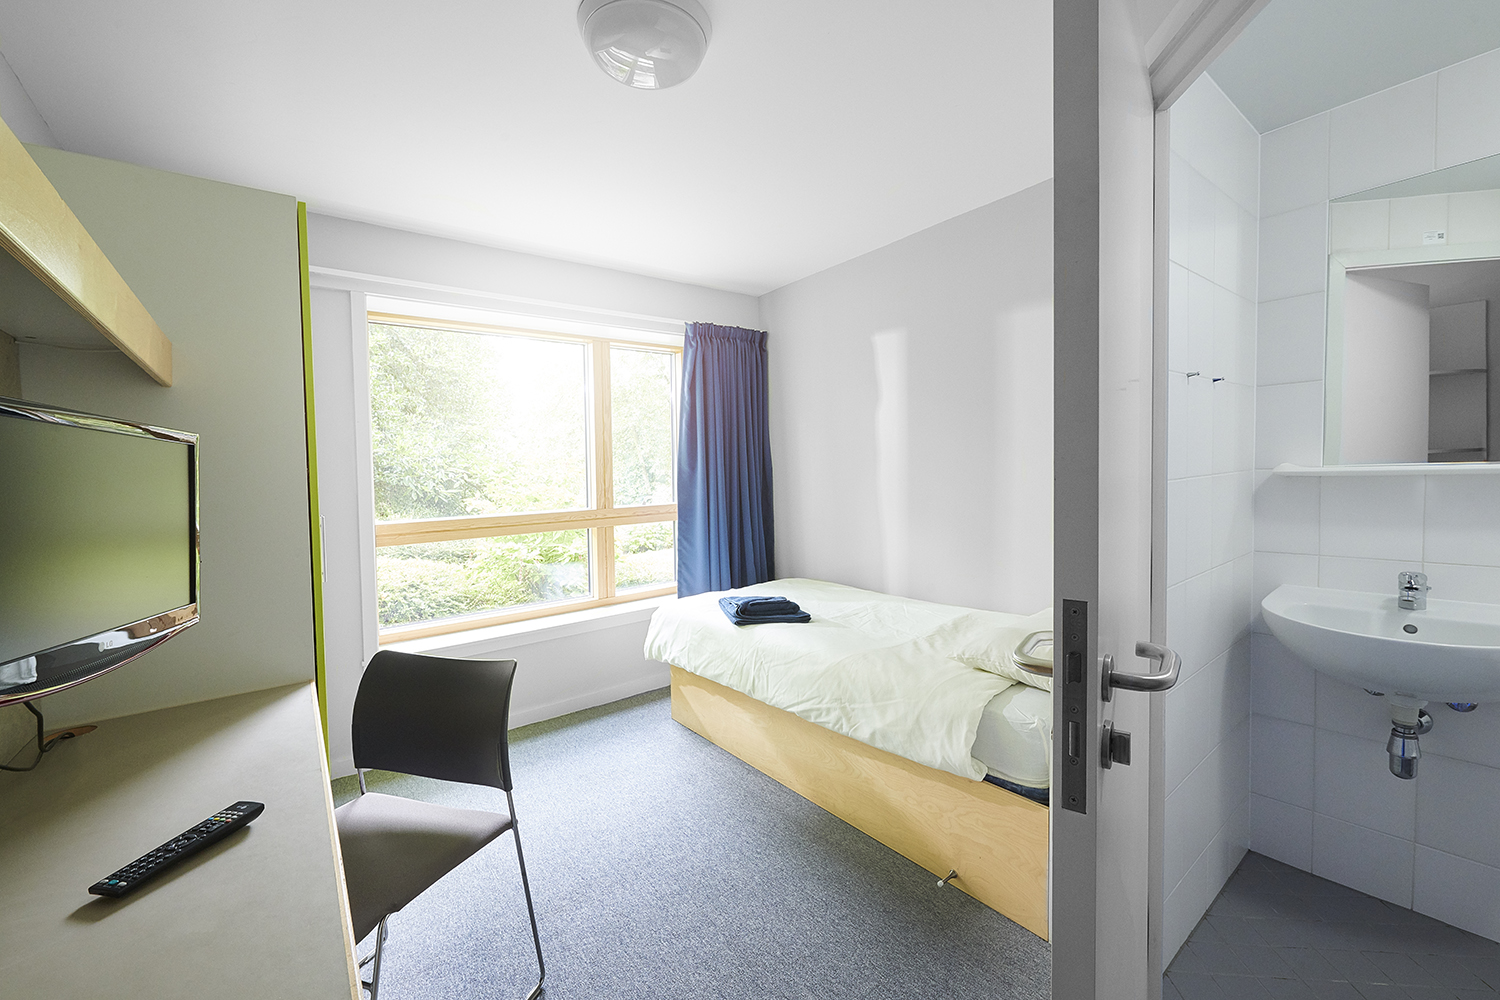 A student bedroom and en-suite shower room in a Founders hall of residence.